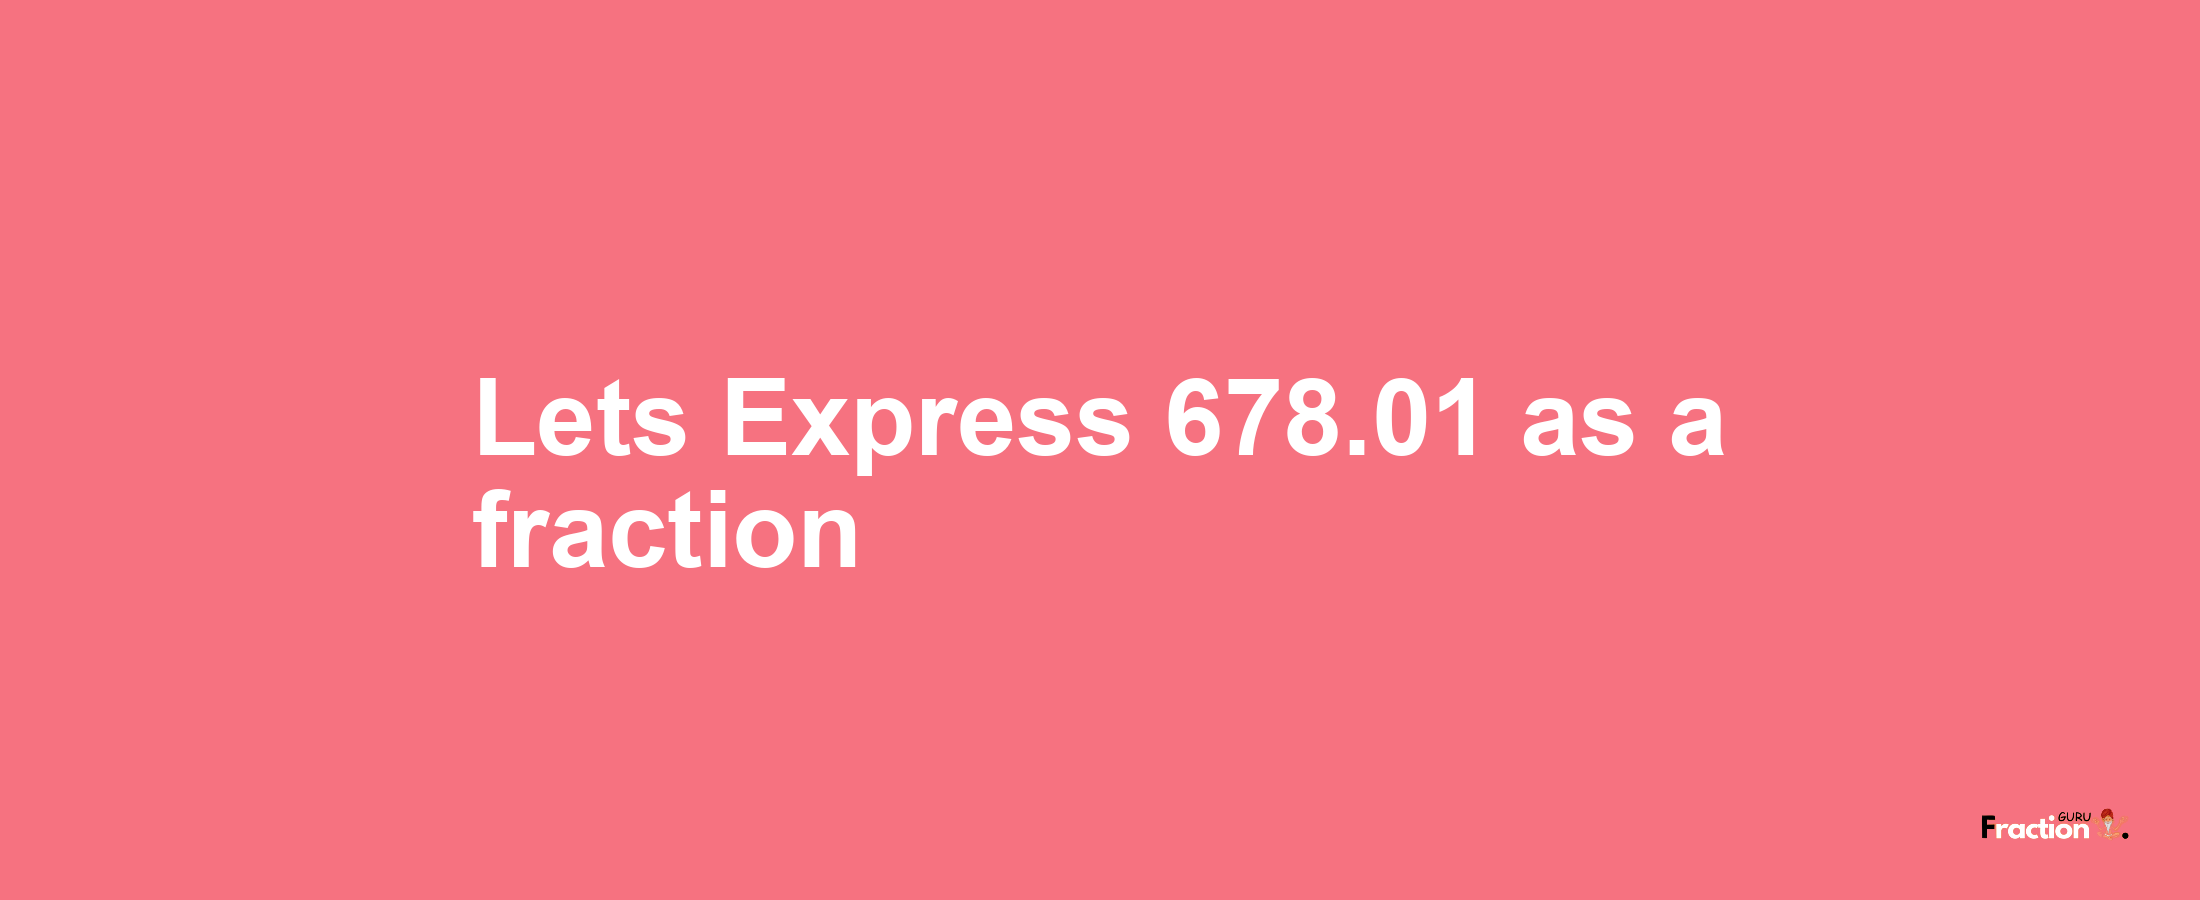 Lets Express 678.01 as afraction